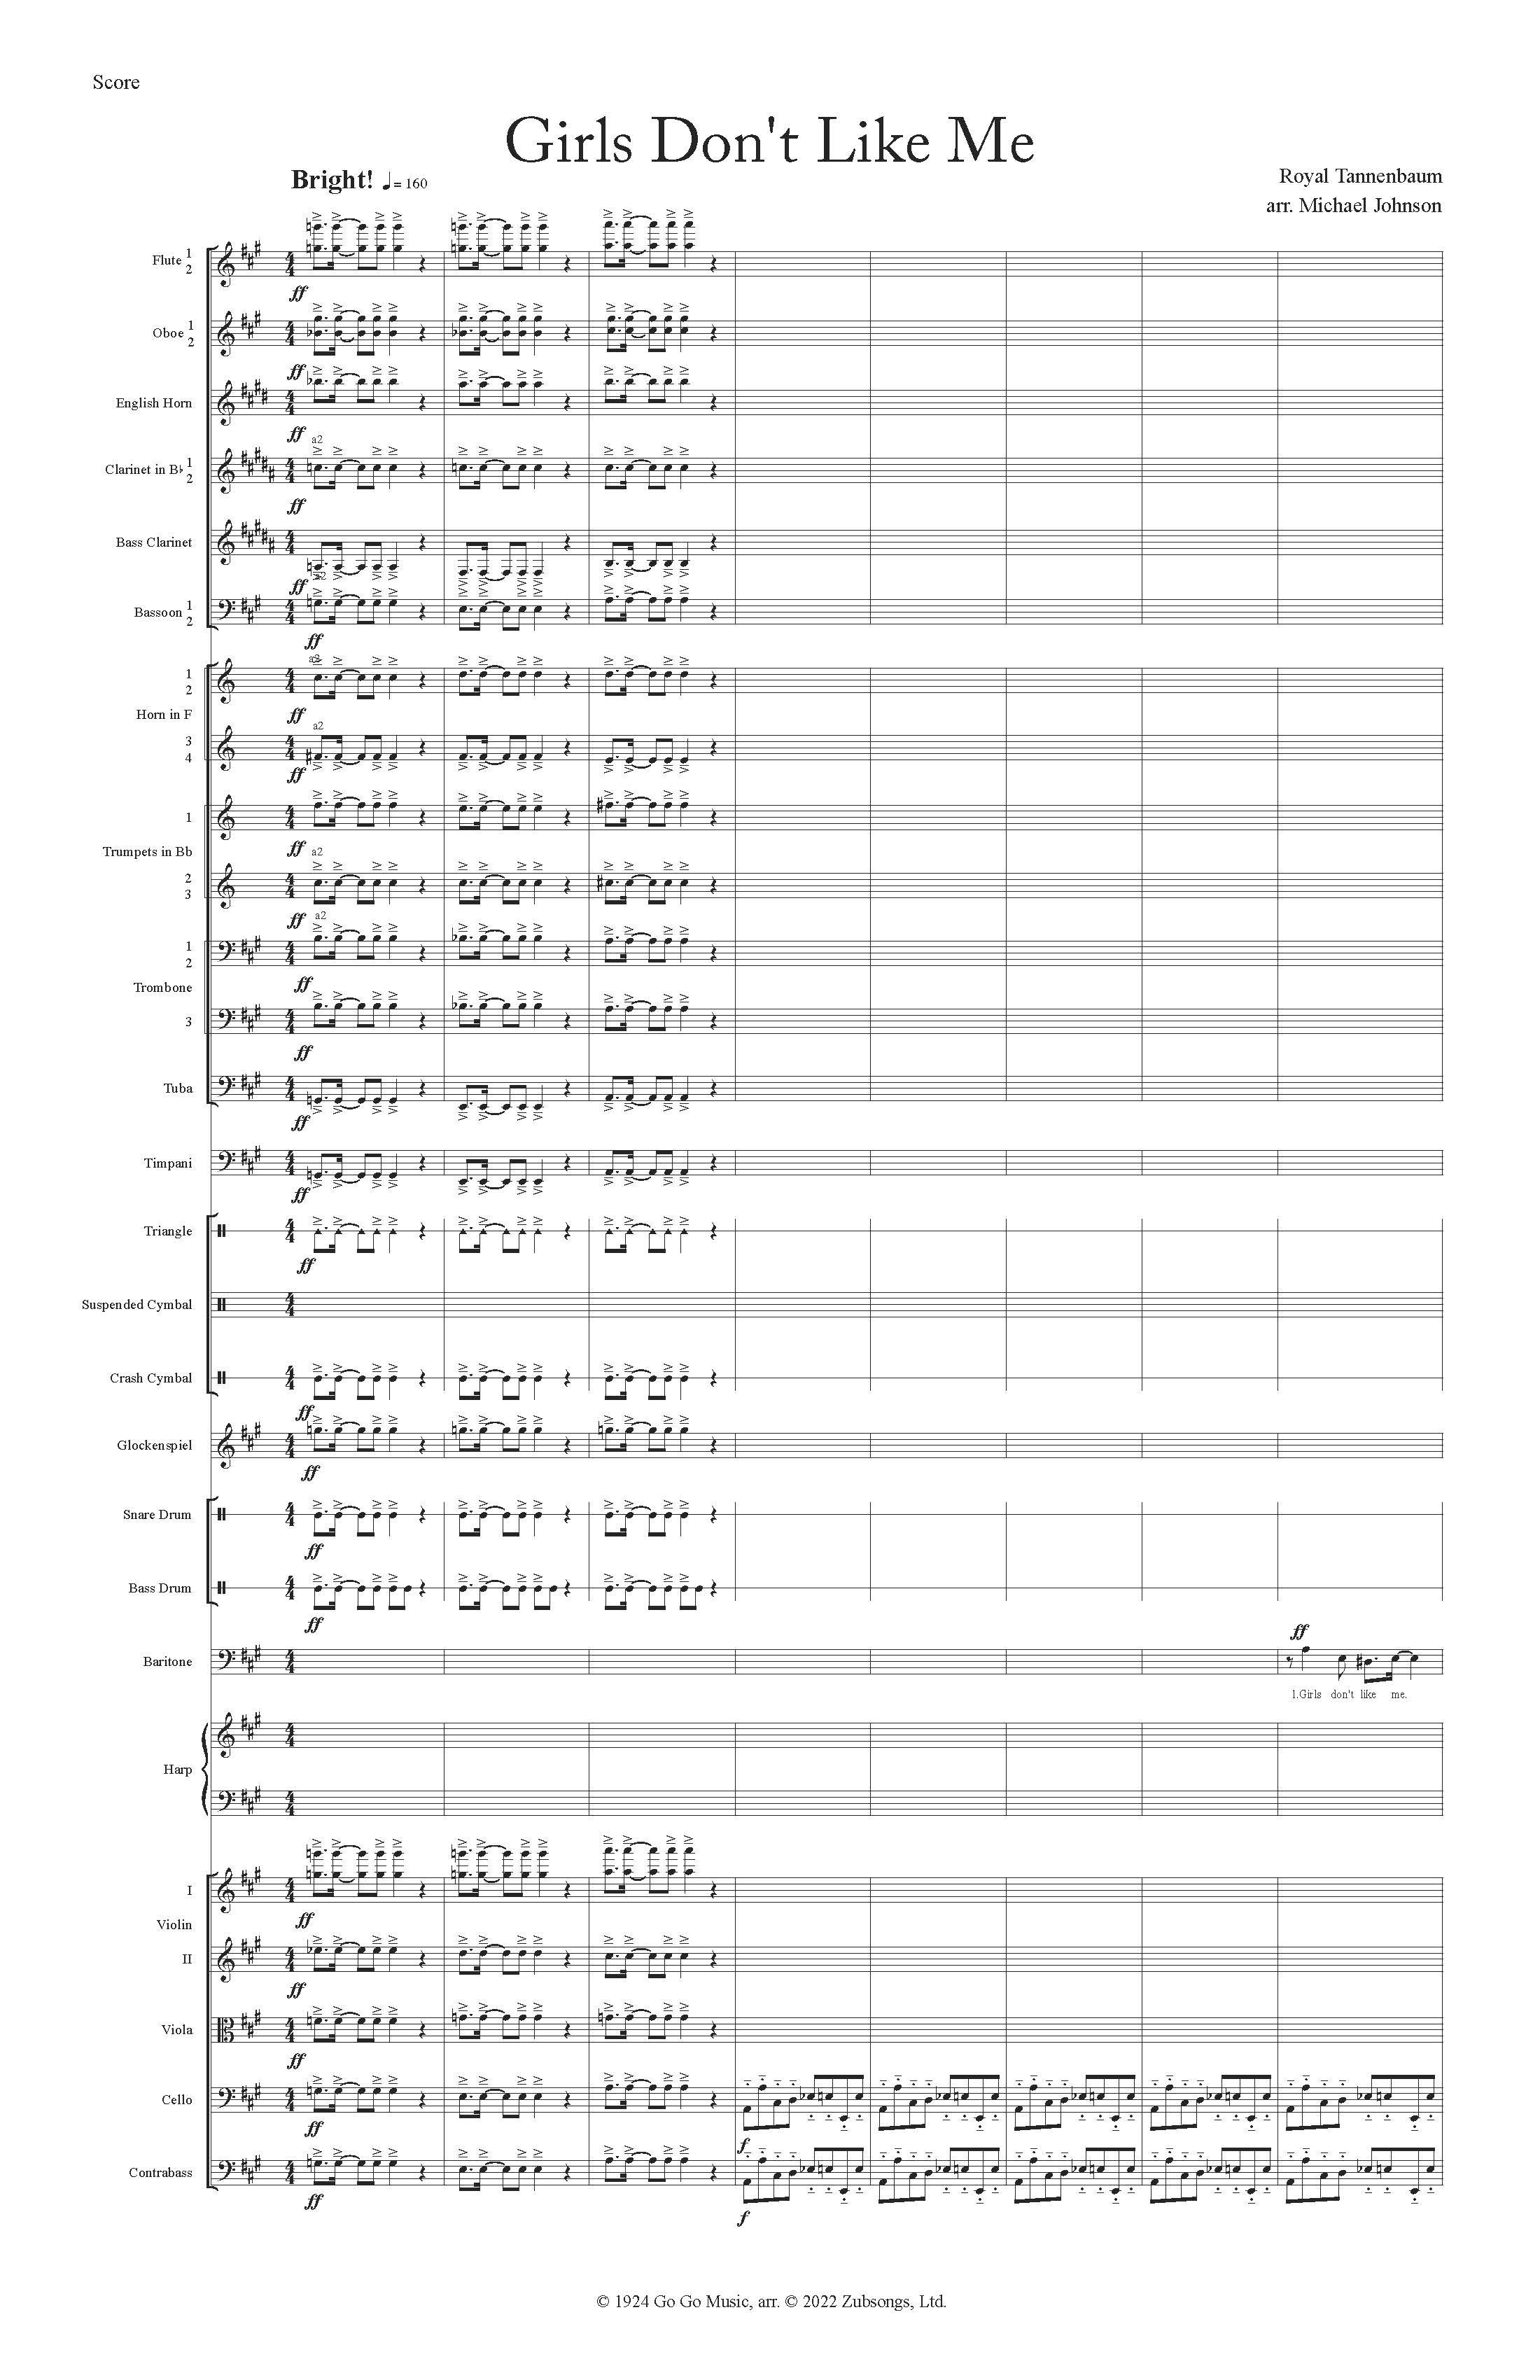 GIRLS DON'T LIKE ME ORCH - Score_Page_01.jpg